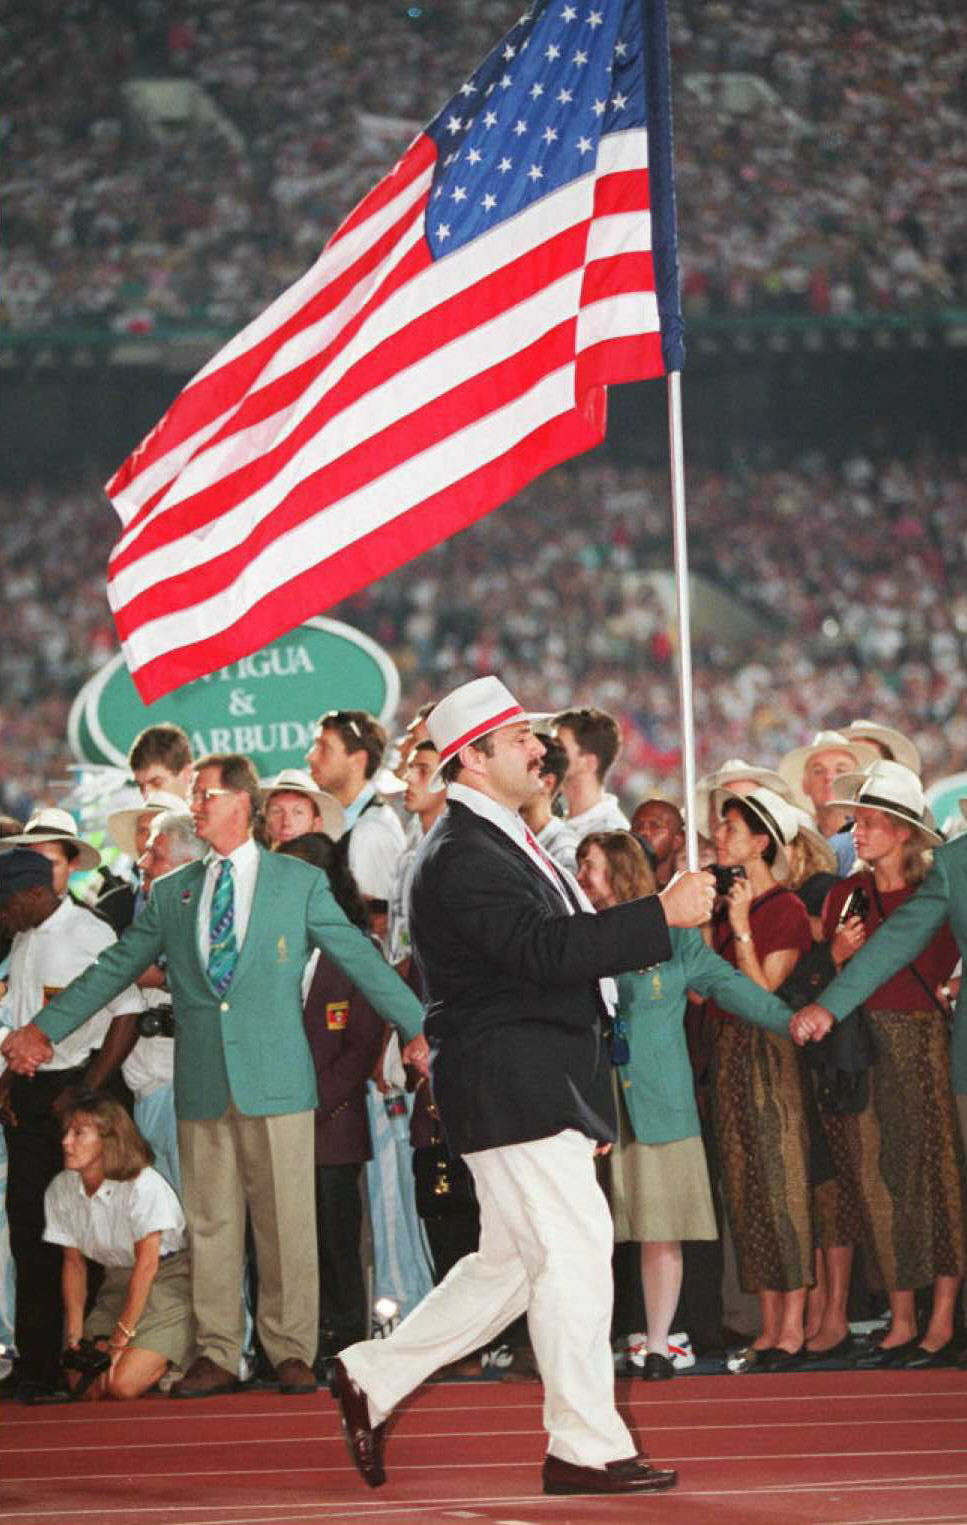 Bruce Baumgartner carried the United States flag at his fourth and final Olympics in 1996 ©Getty Images